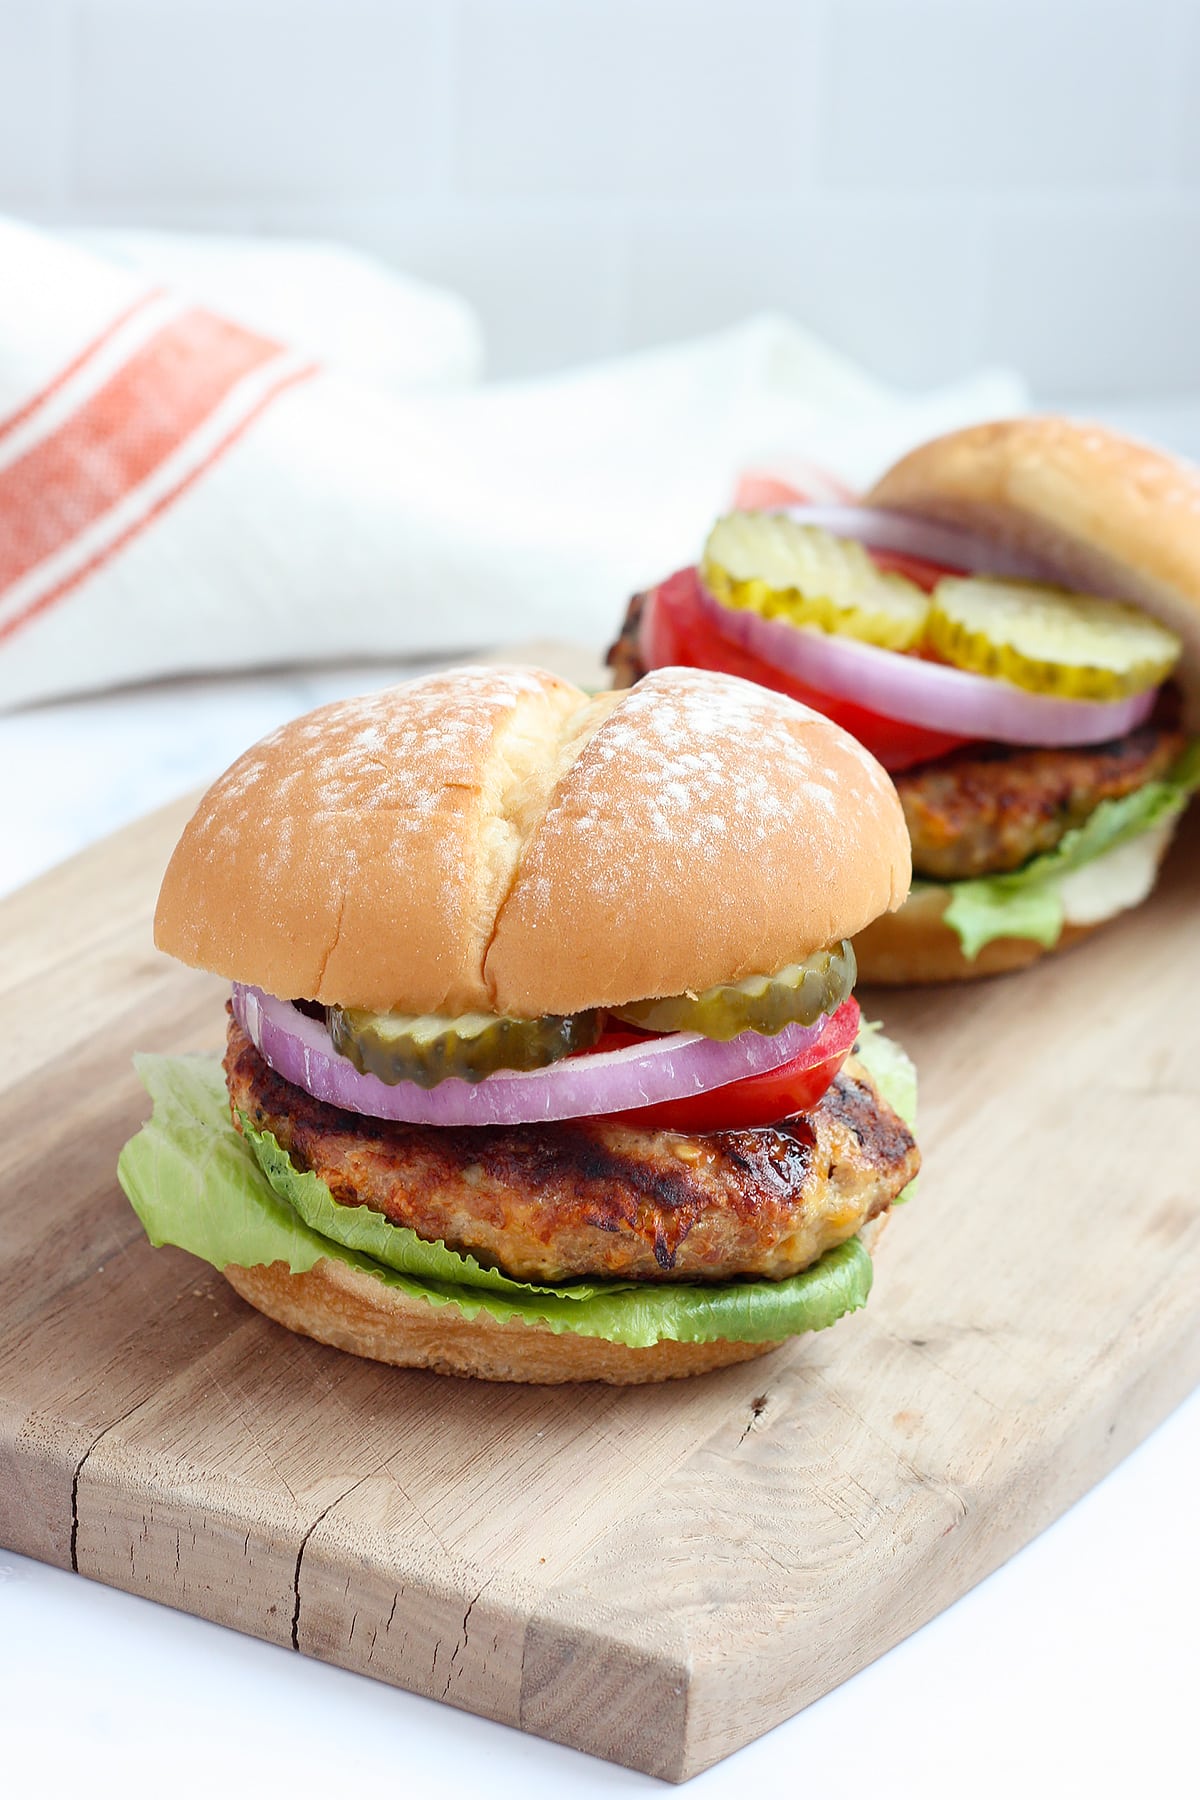 Juicy Turkey burgers with lettuce, tomatoes, and onions on a wooden cutting board.